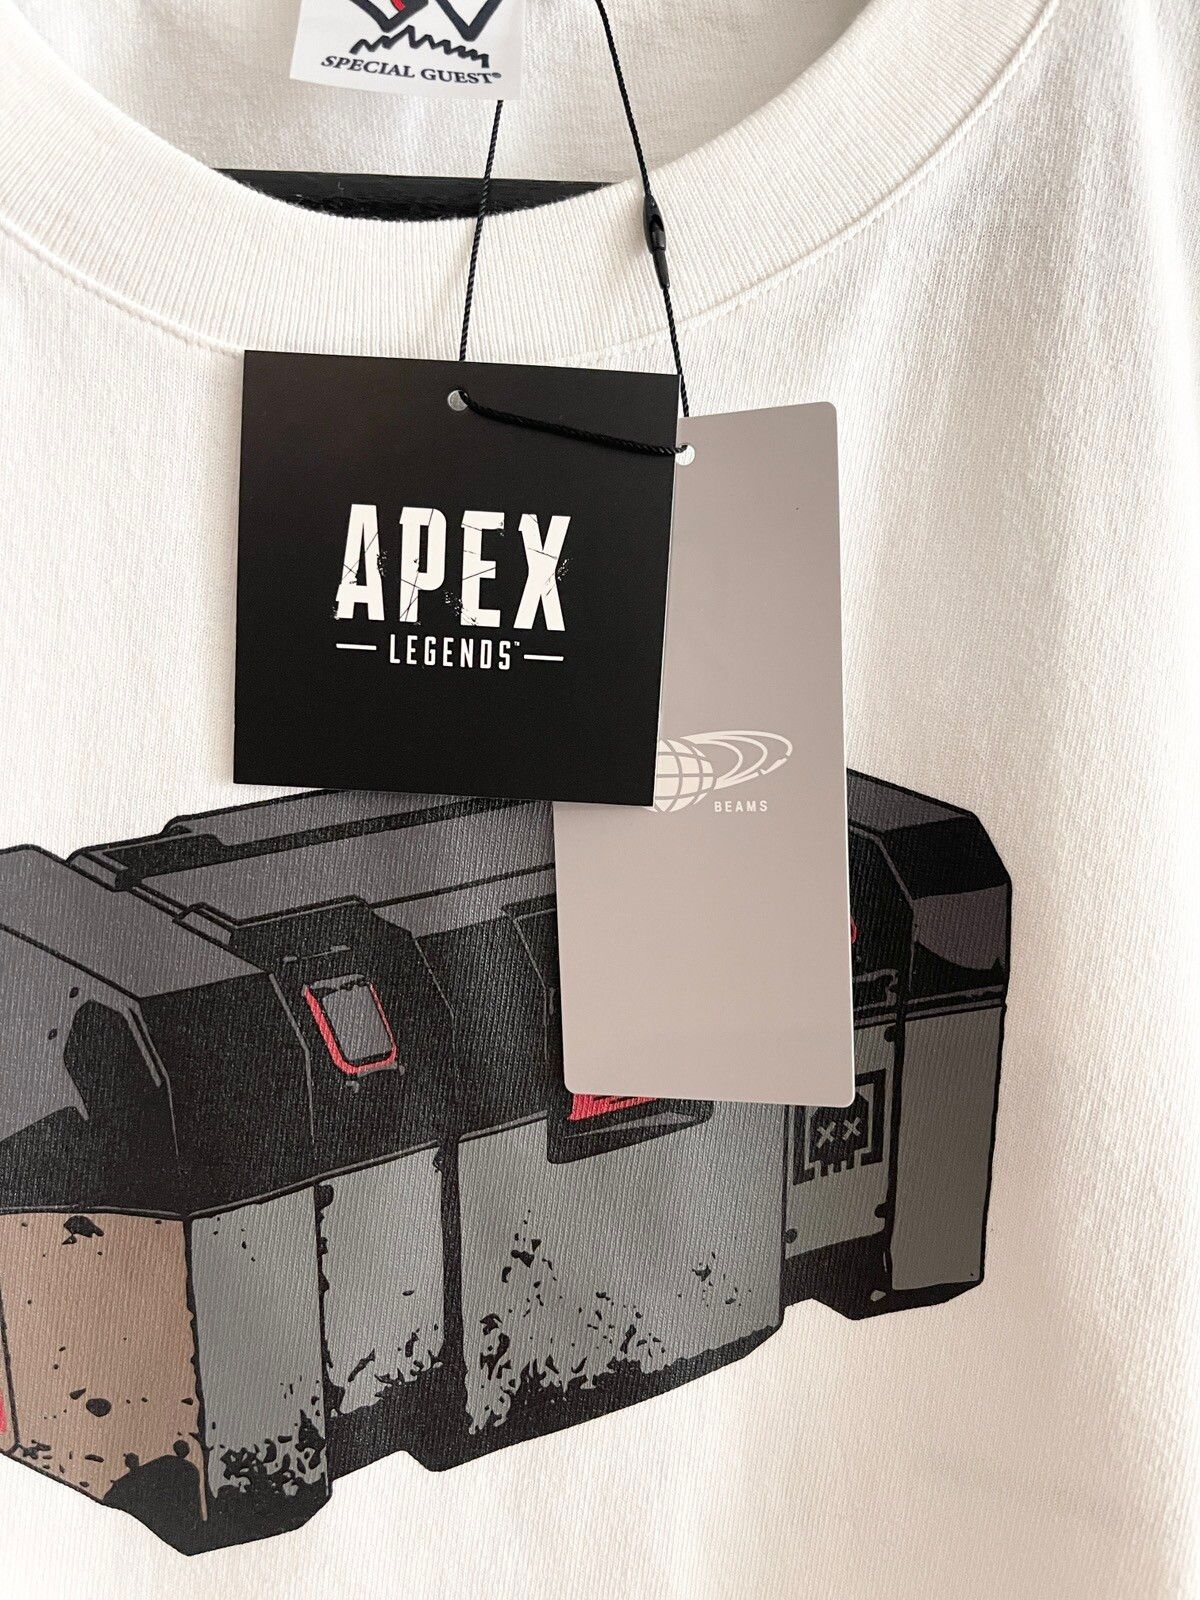 RARE Apex Legends x Beams x Special Guest Japanese Tee - 4